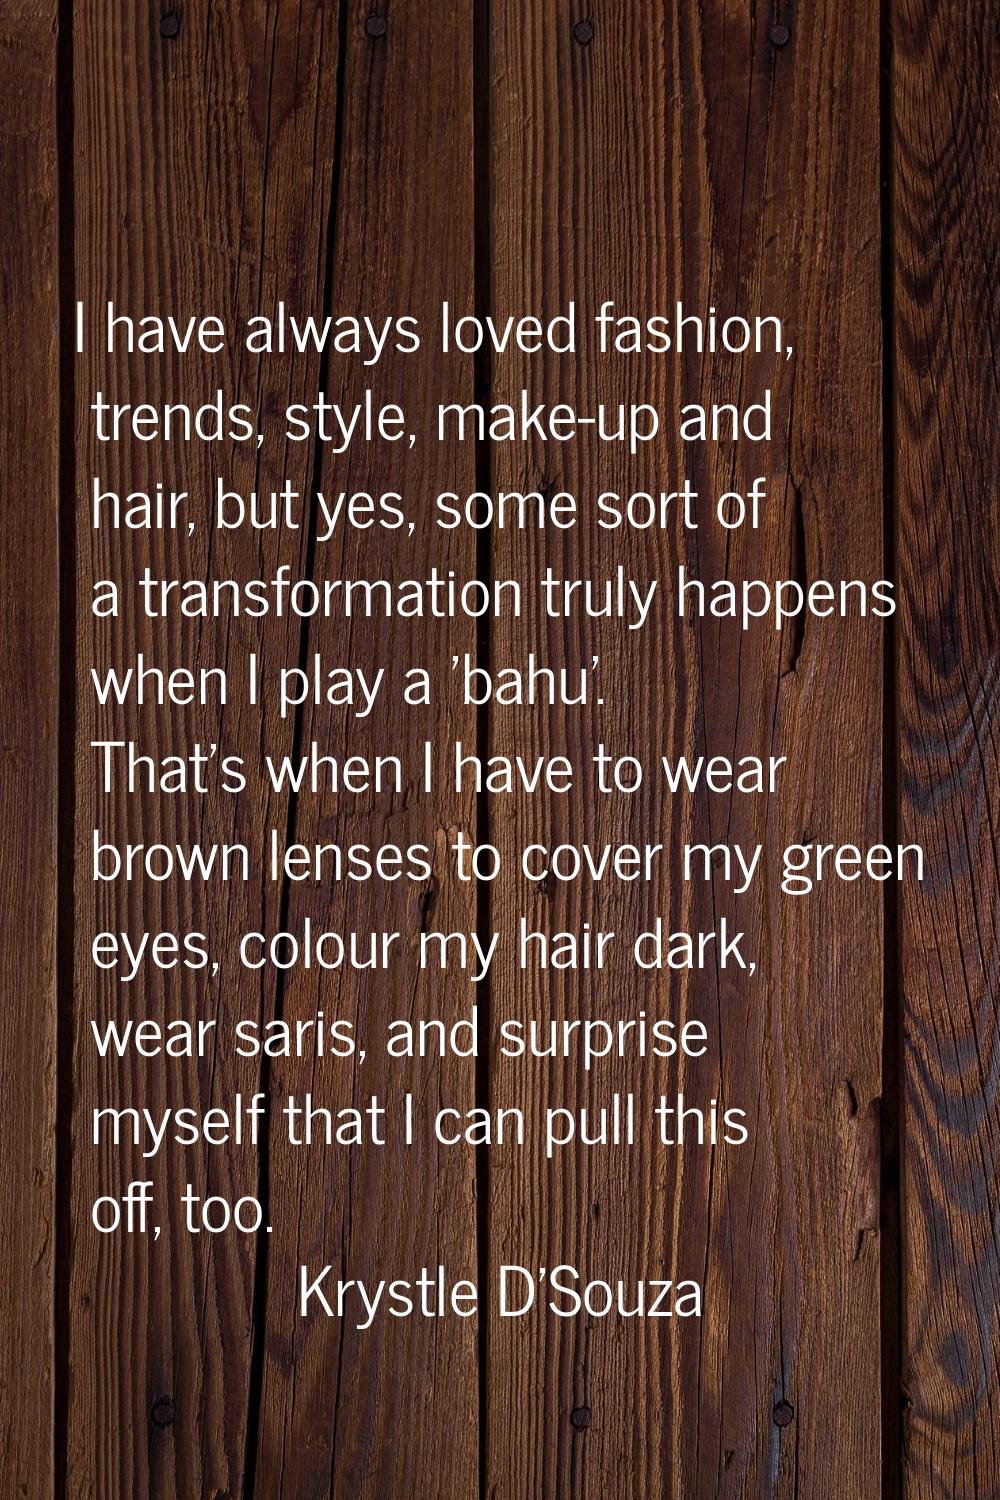 I have always loved fashion, trends, style, make-up and hair, but yes, some sort of a transformatio